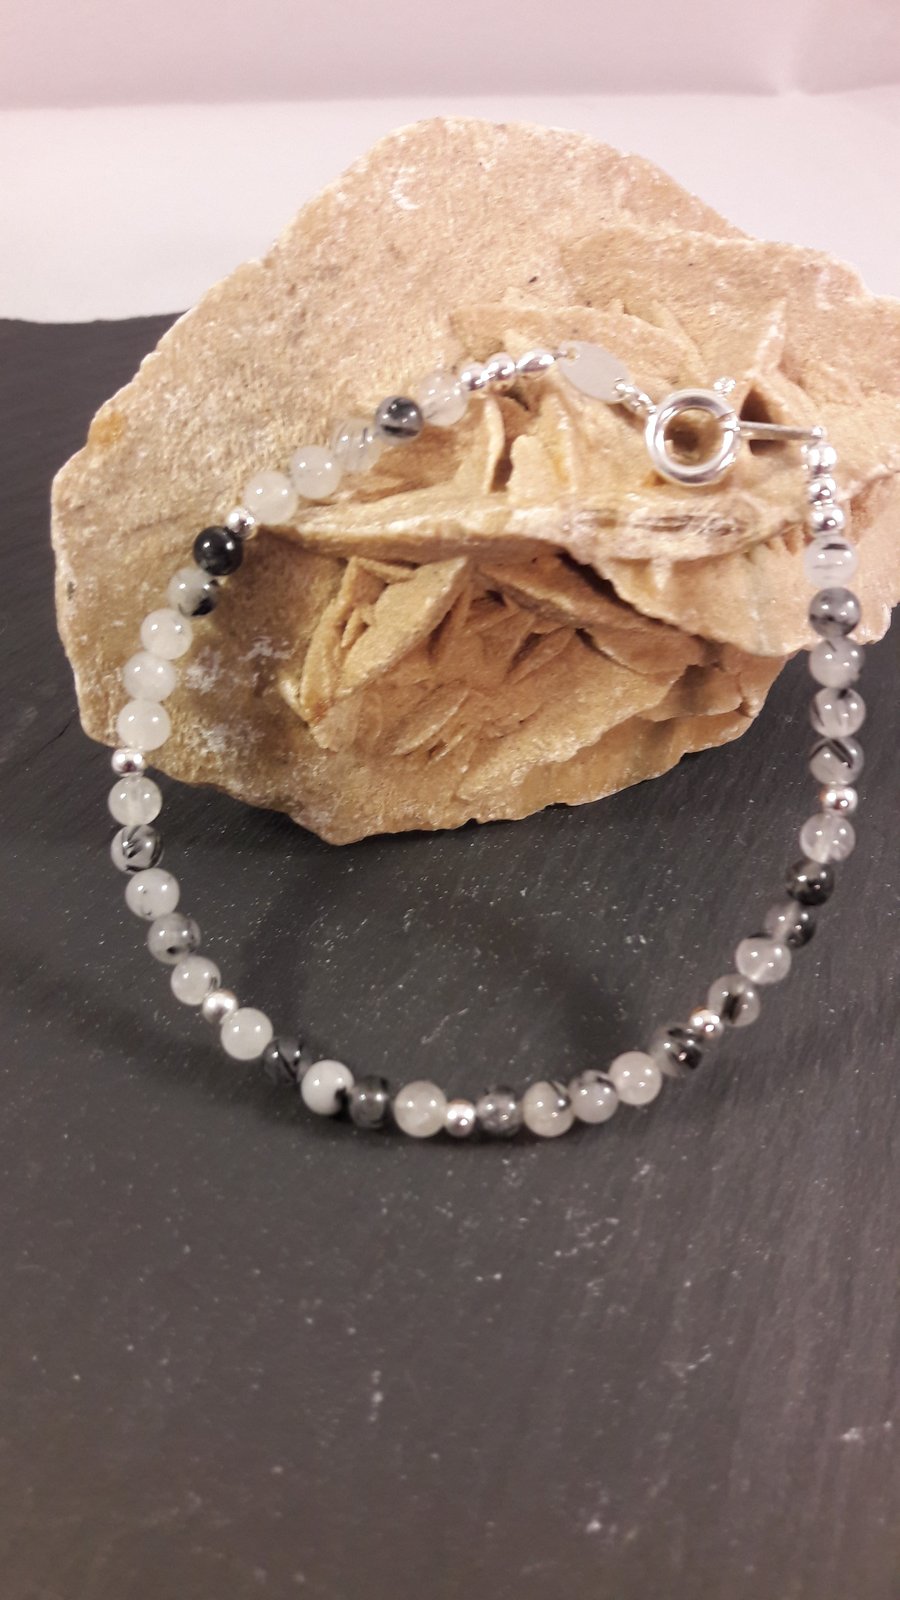 Black Rutile Quartz and Sterling Silver Bracelet with Your Choice of Charm